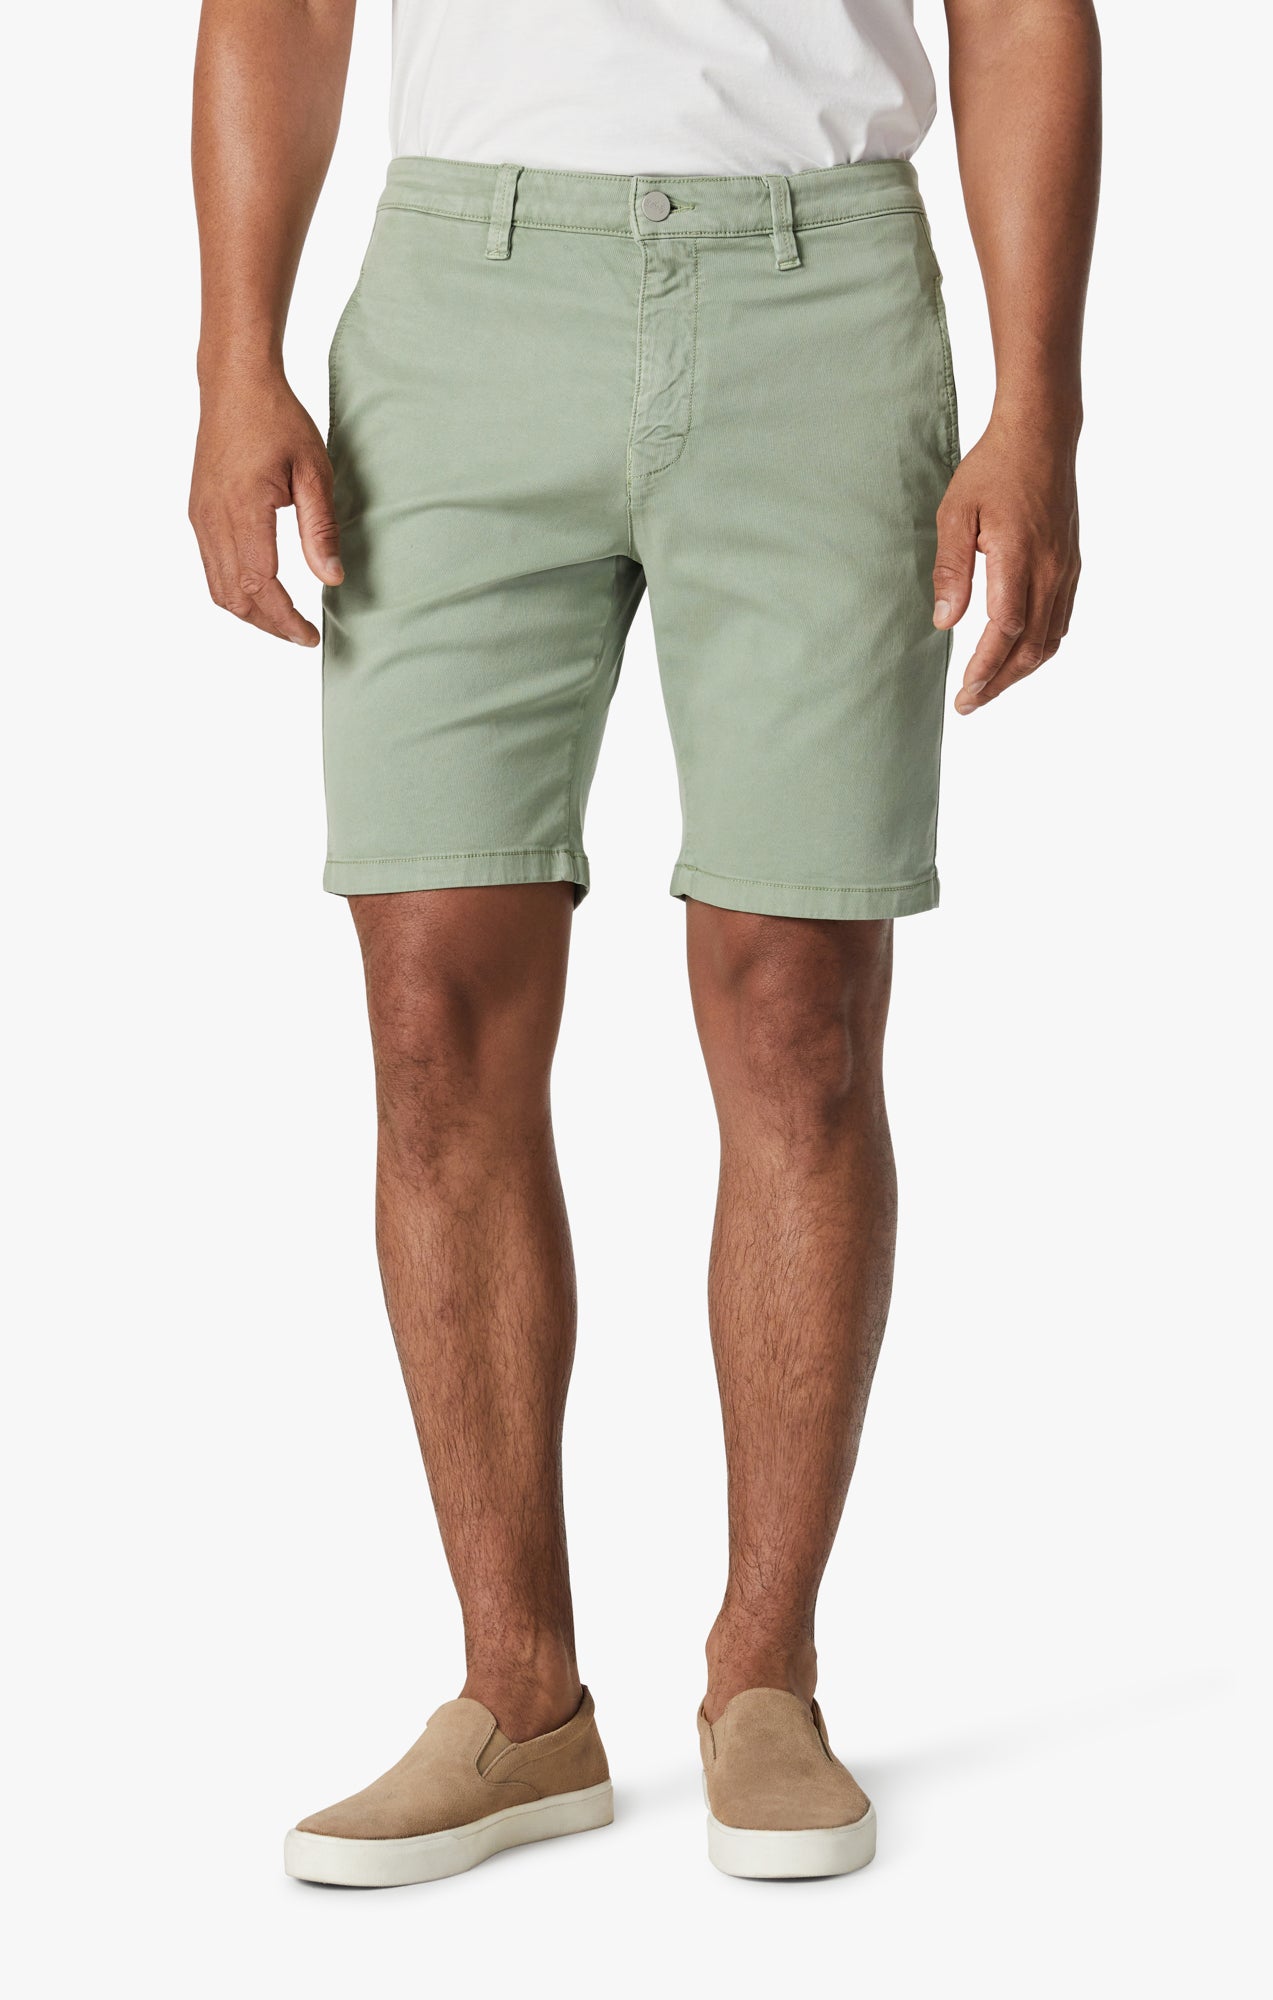 Nevada Shorts in Green Soft Touch Image 3